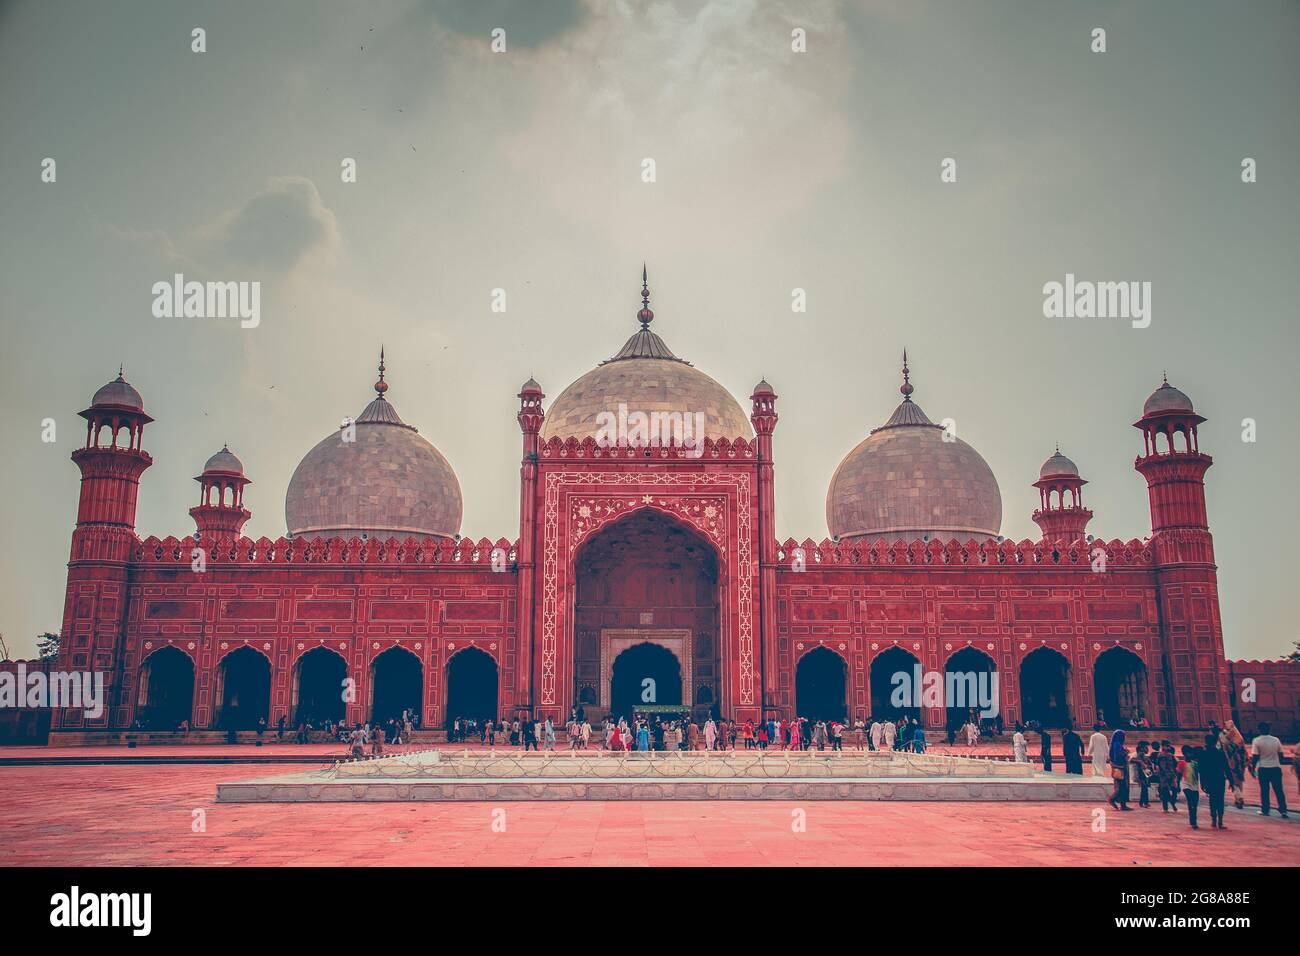 Badshahi masjid known as kings mosque in lahore at evening with kids playing in mosque’s garden and with the lahore city in background Stock Photo